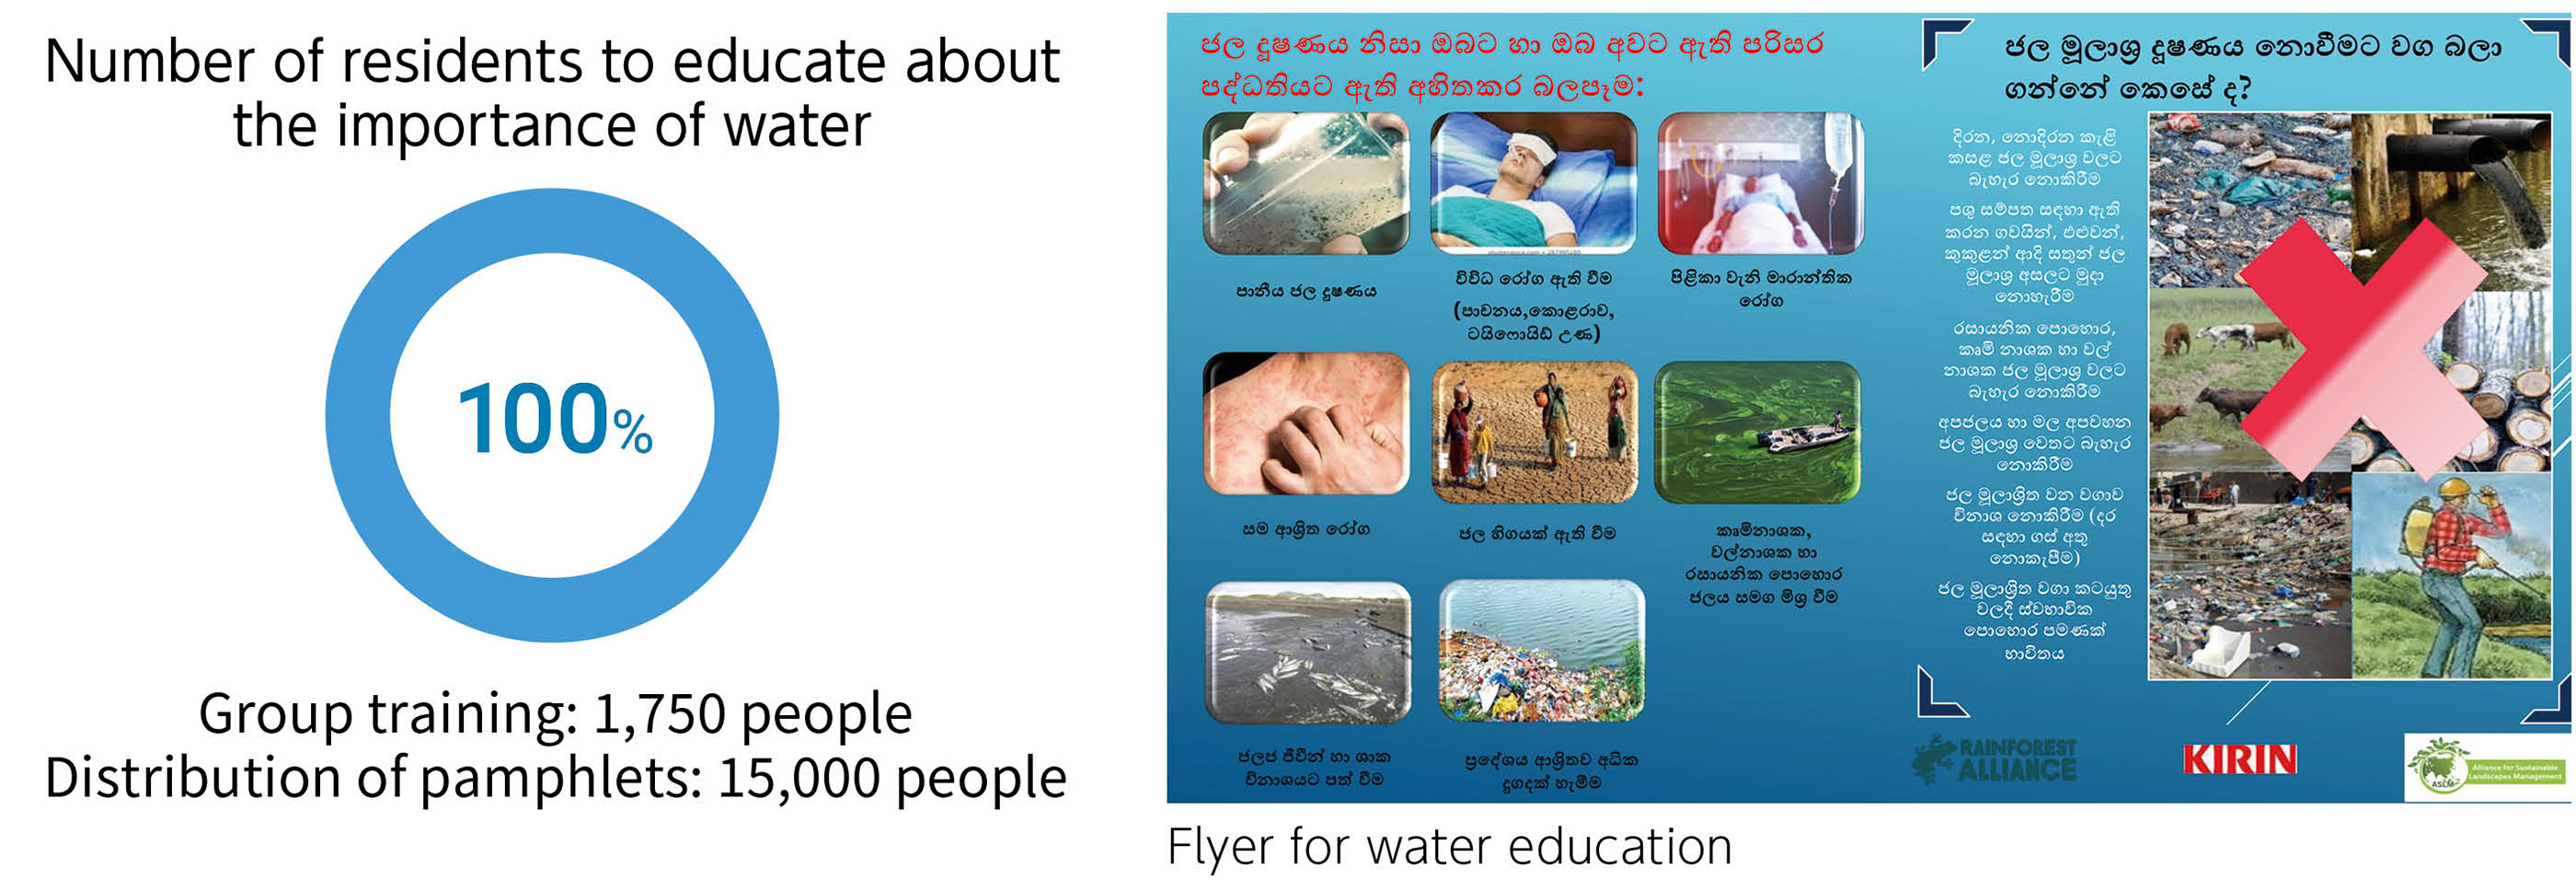 Figure: Number of residents to educate about the importance of water 15000